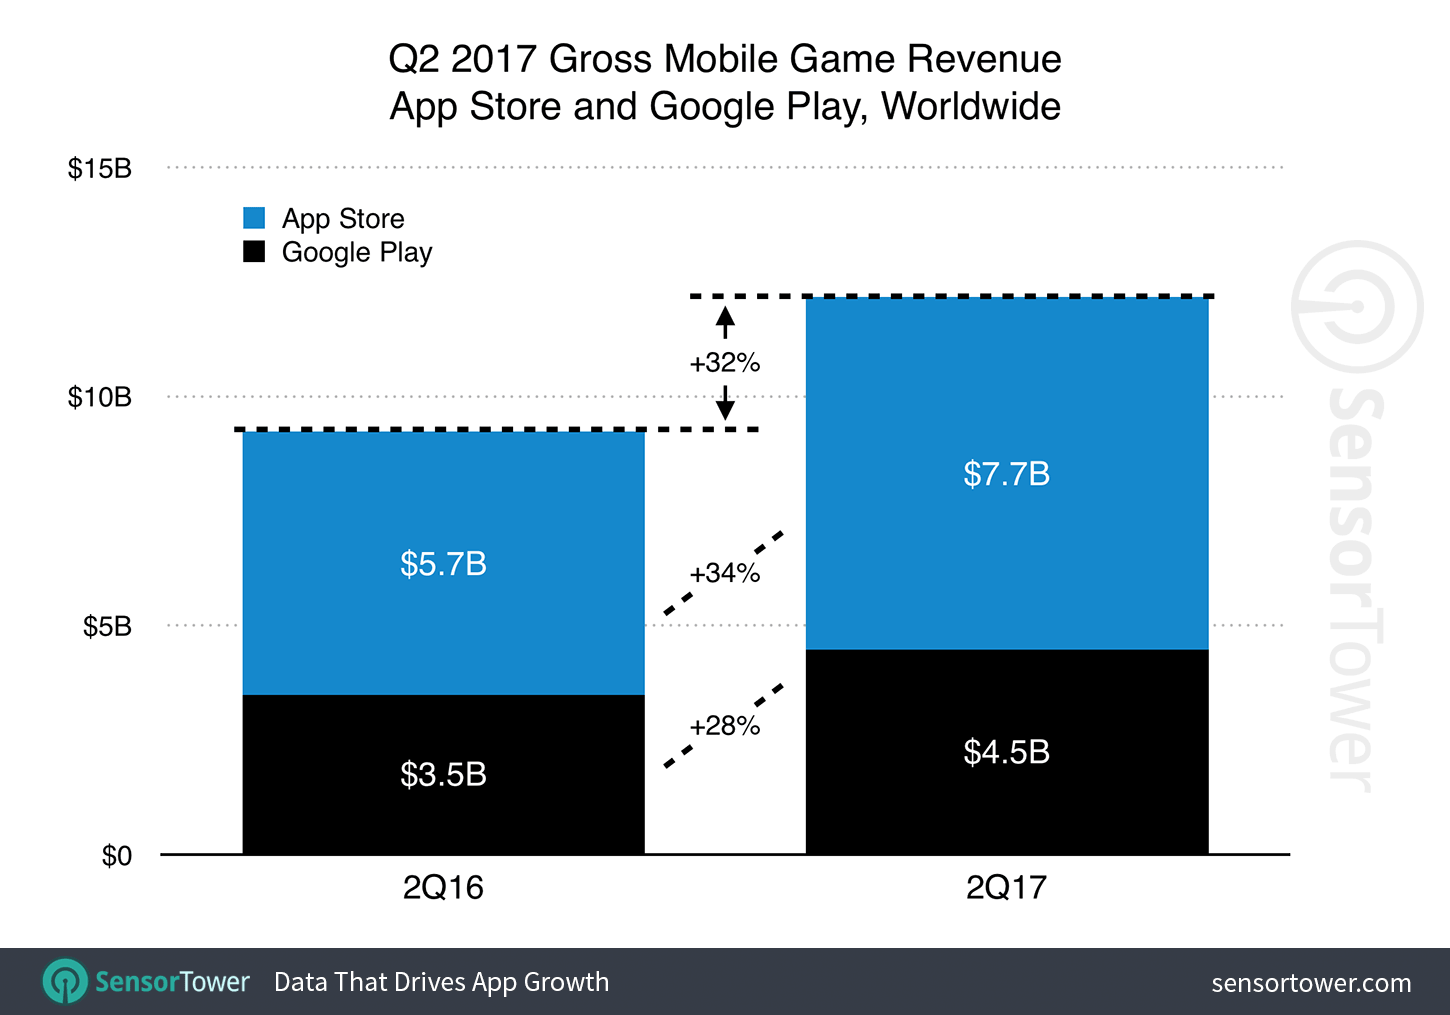 Q2 2017 Games Category Worldwide Revenue Growth